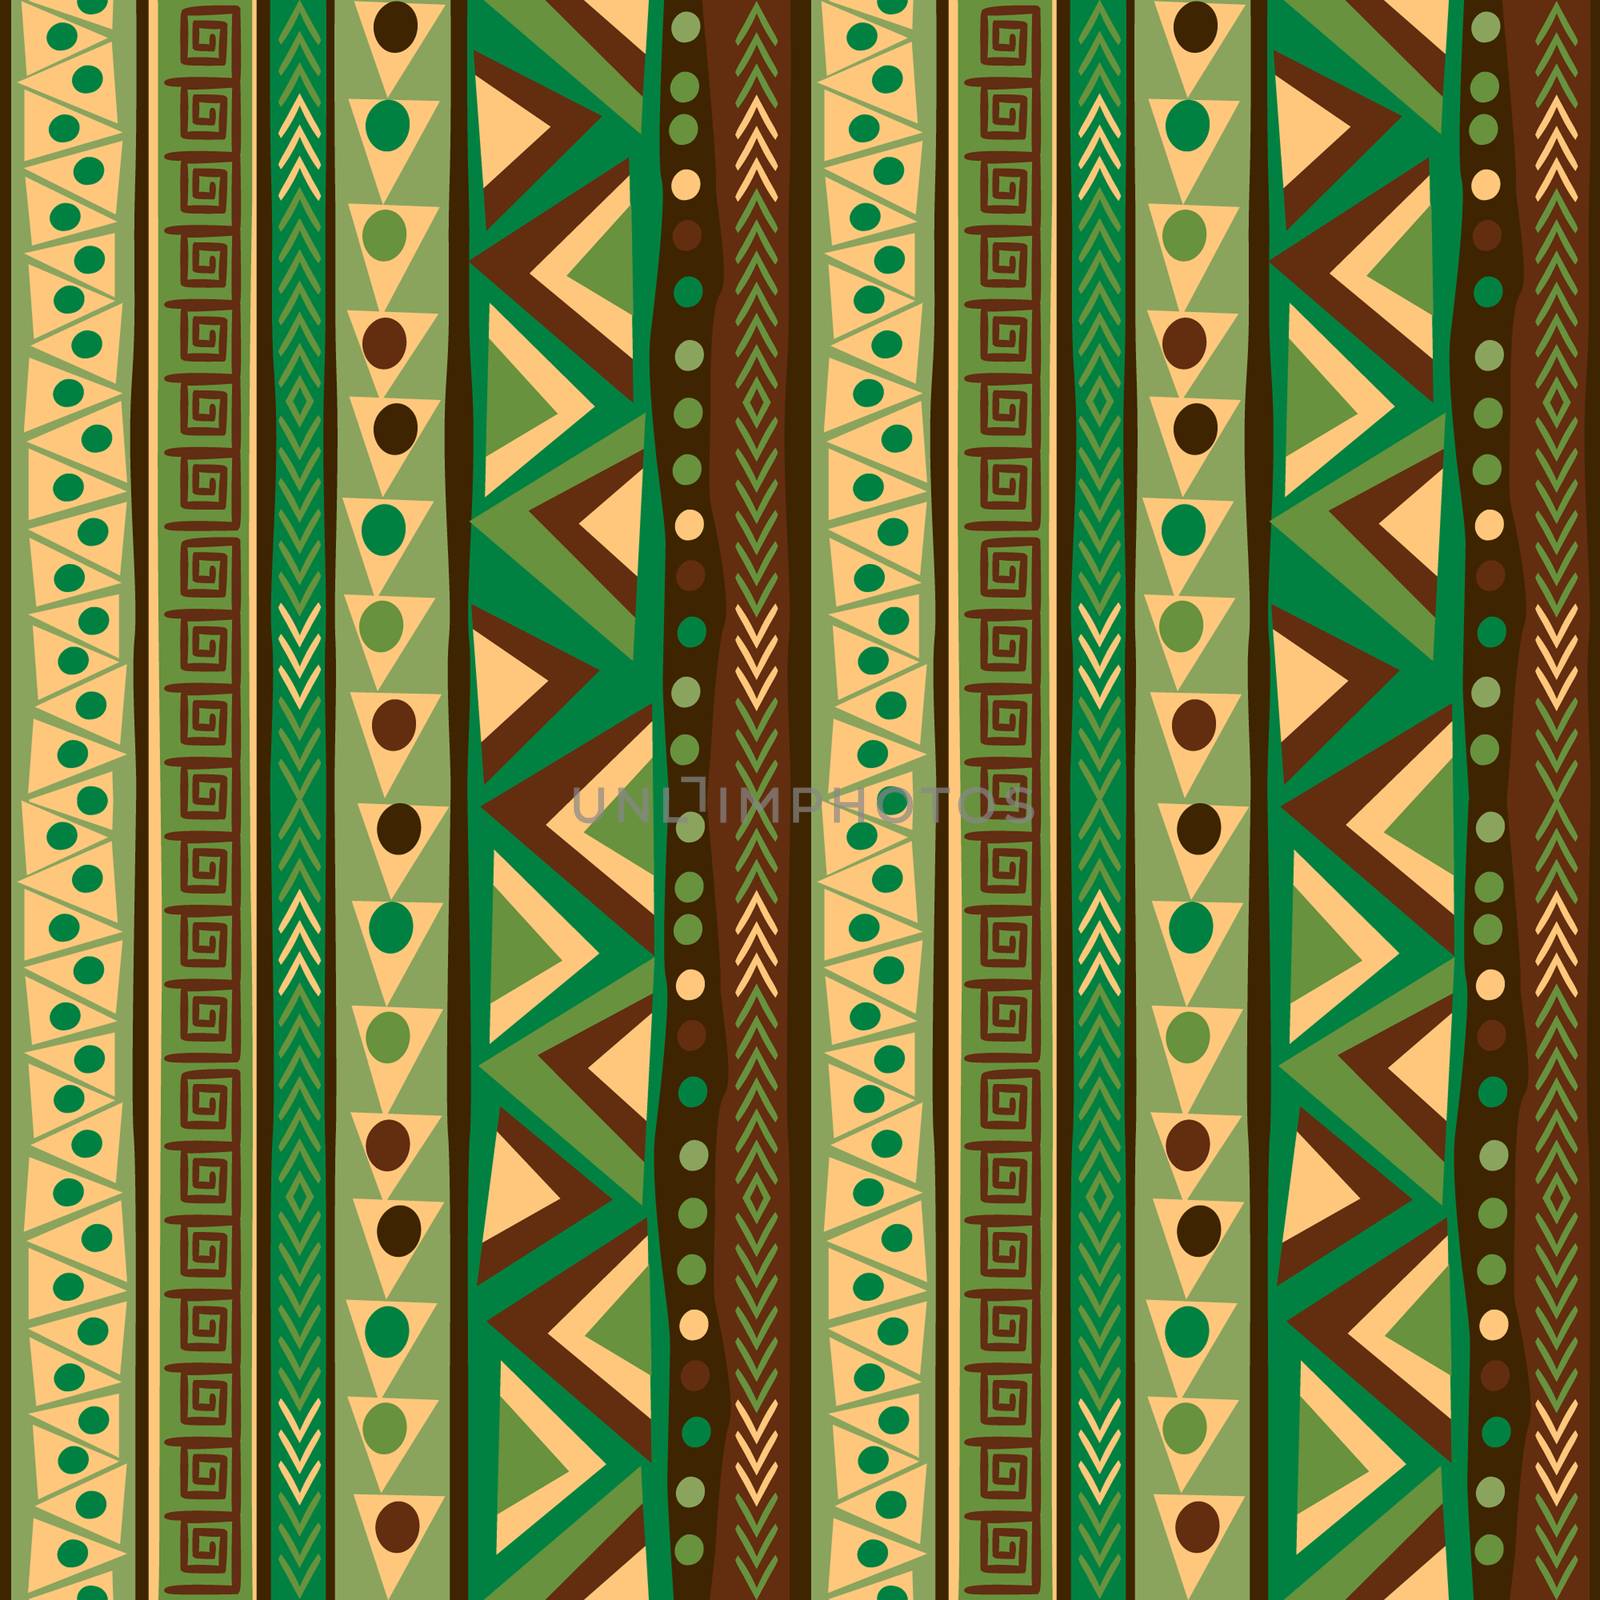 Pattern with vertical ethnic motifs